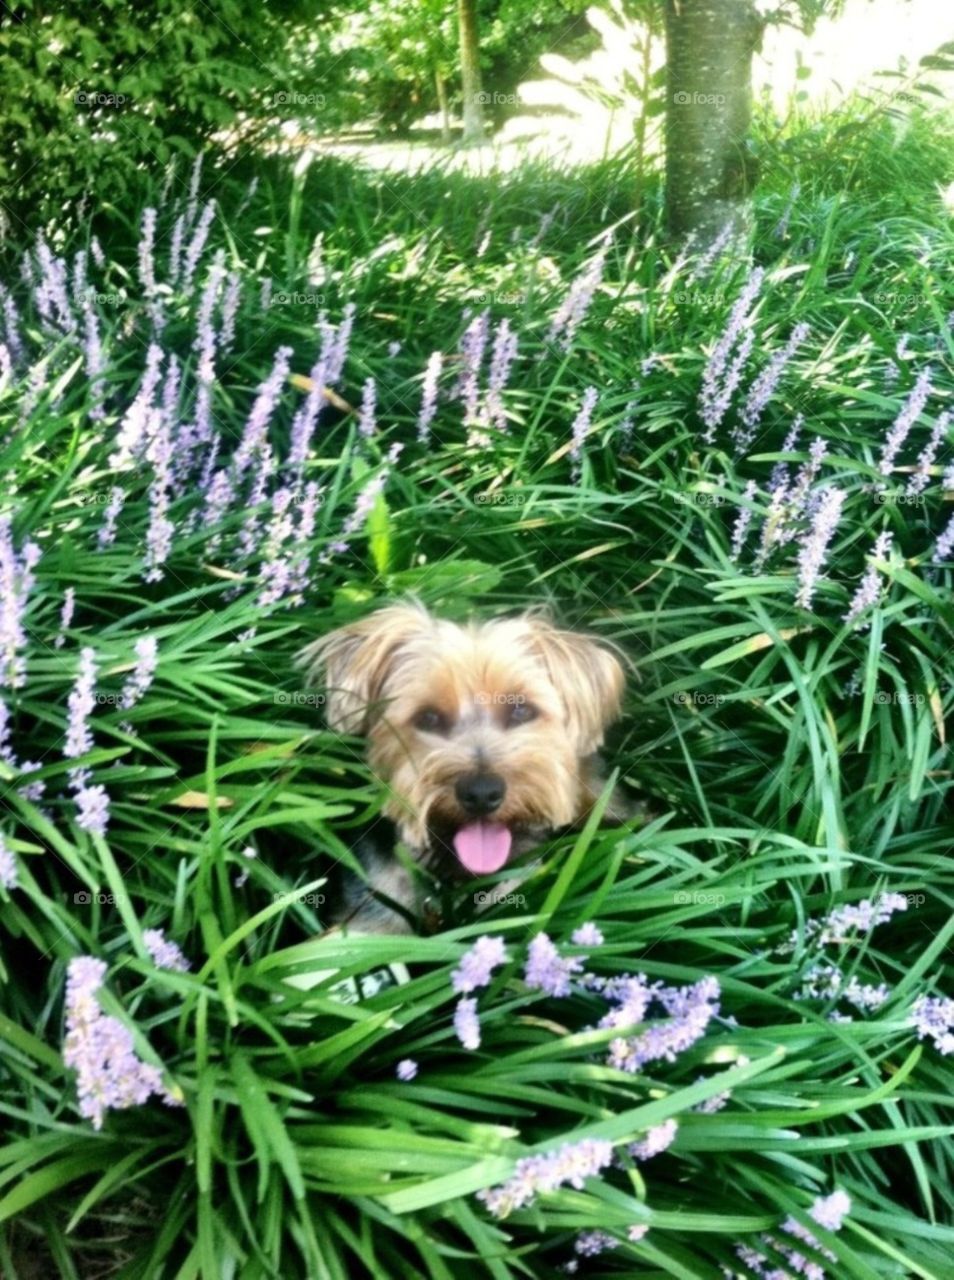 Spring pup . Dog catching some shade in a flower bed